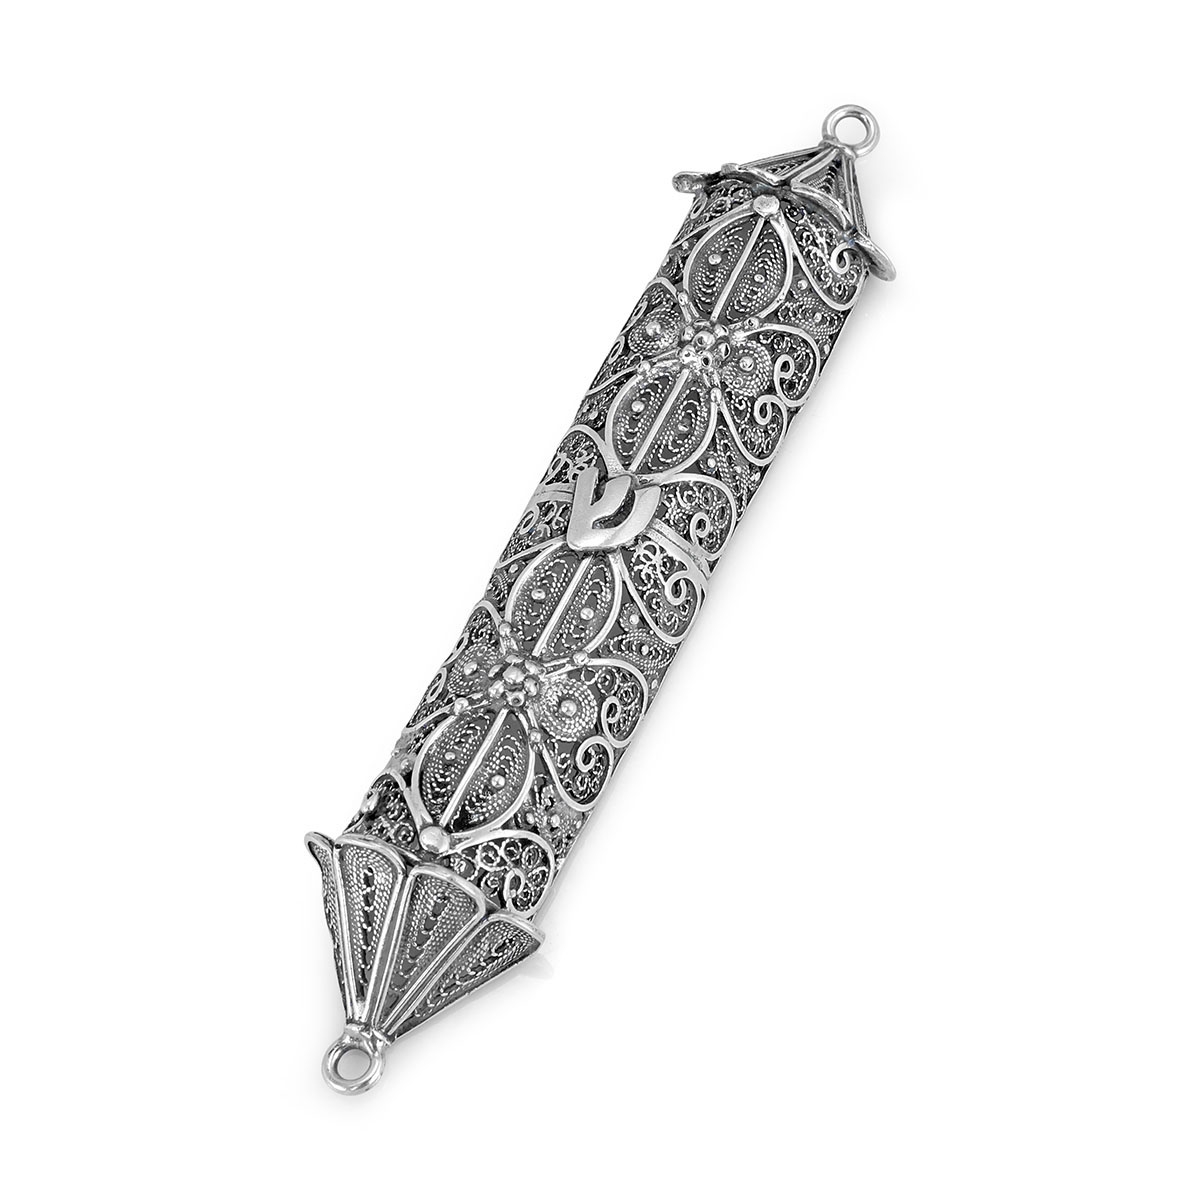 Traditional Yemenite Art Handcrafted Sterling Silver Mezuzah Case With Floral Filigree Design - 1